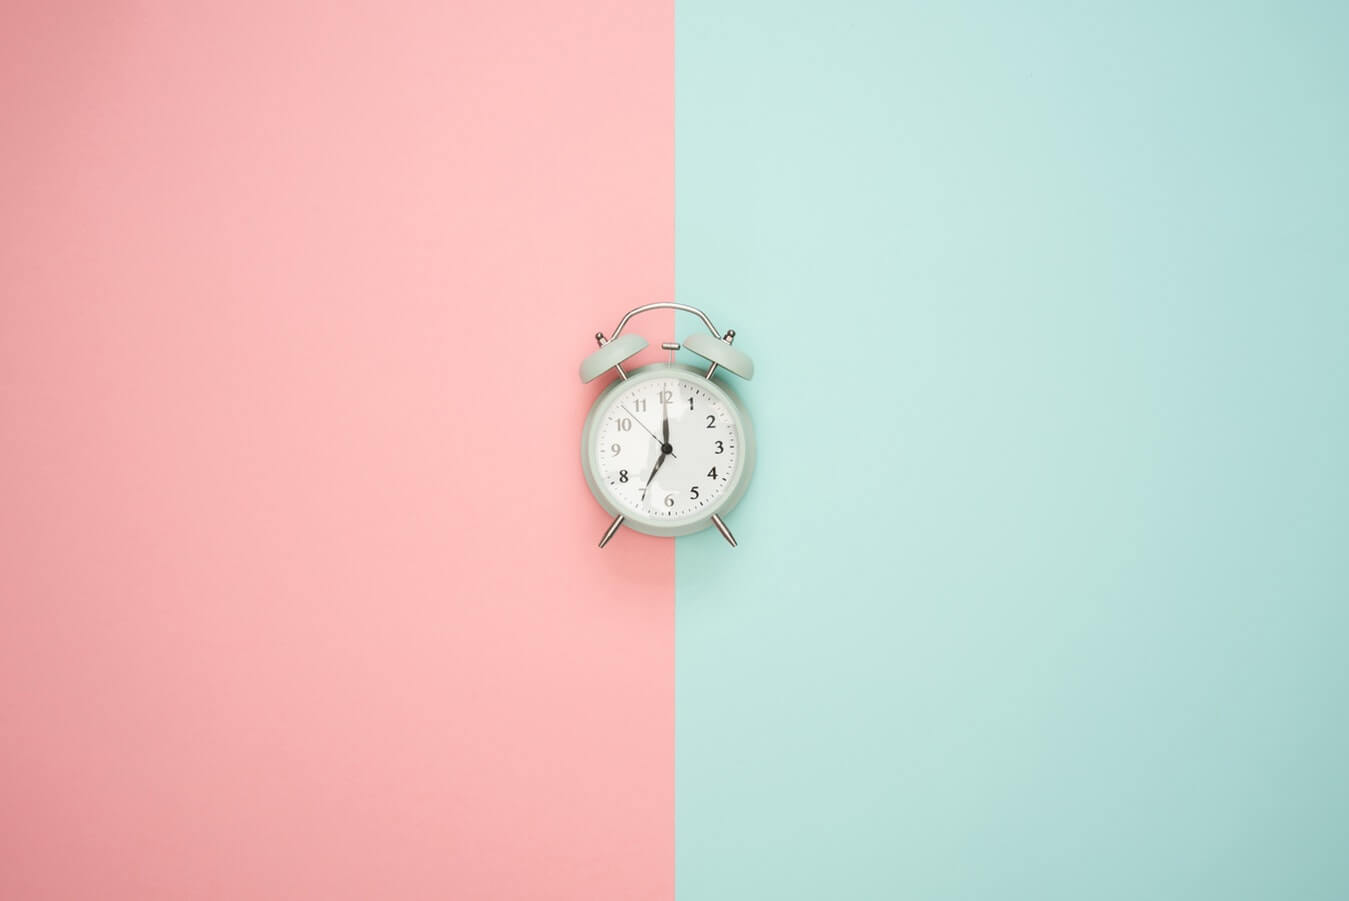 Ayoa | 6 time management hacks to help you to work smarter